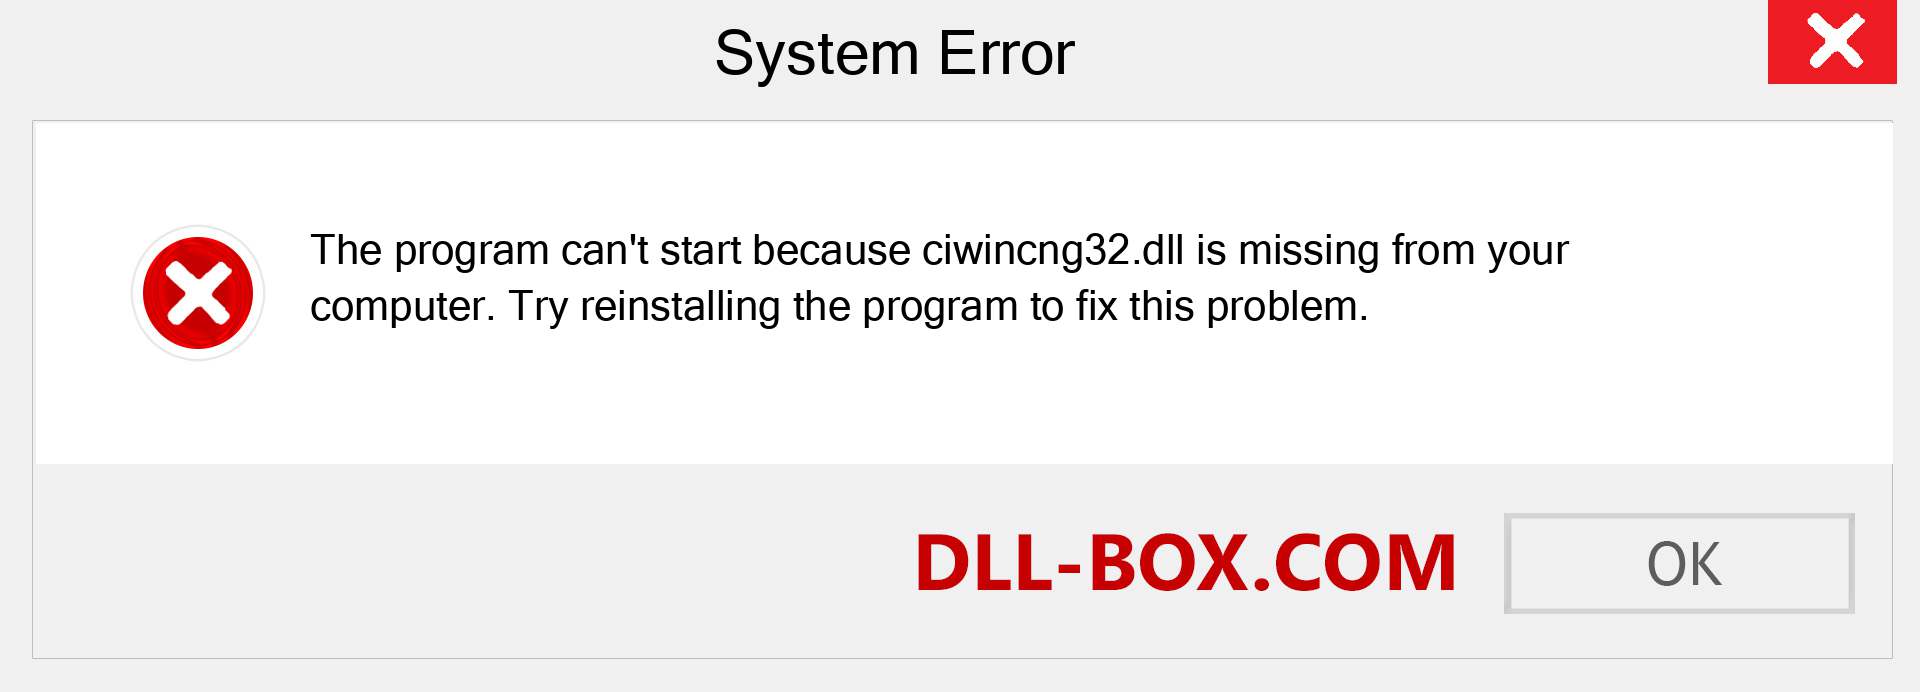  ciwincng32.dll file is missing?. Download for Windows 7, 8, 10 - Fix  ciwincng32 dll Missing Error on Windows, photos, images